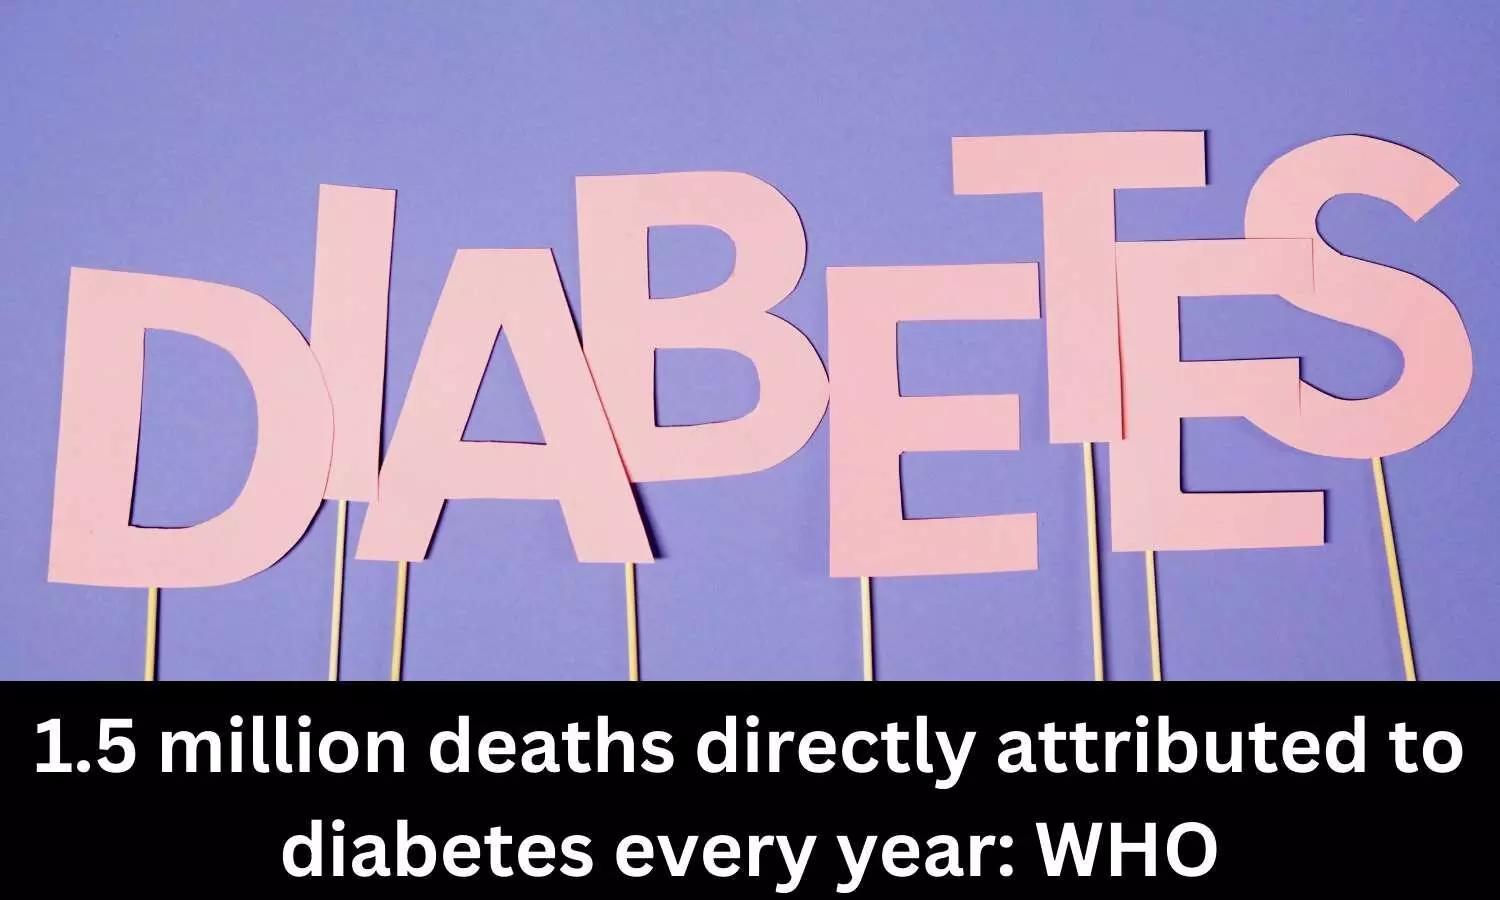 1.5 million deaths directly attributed to diabetes every year: WHO